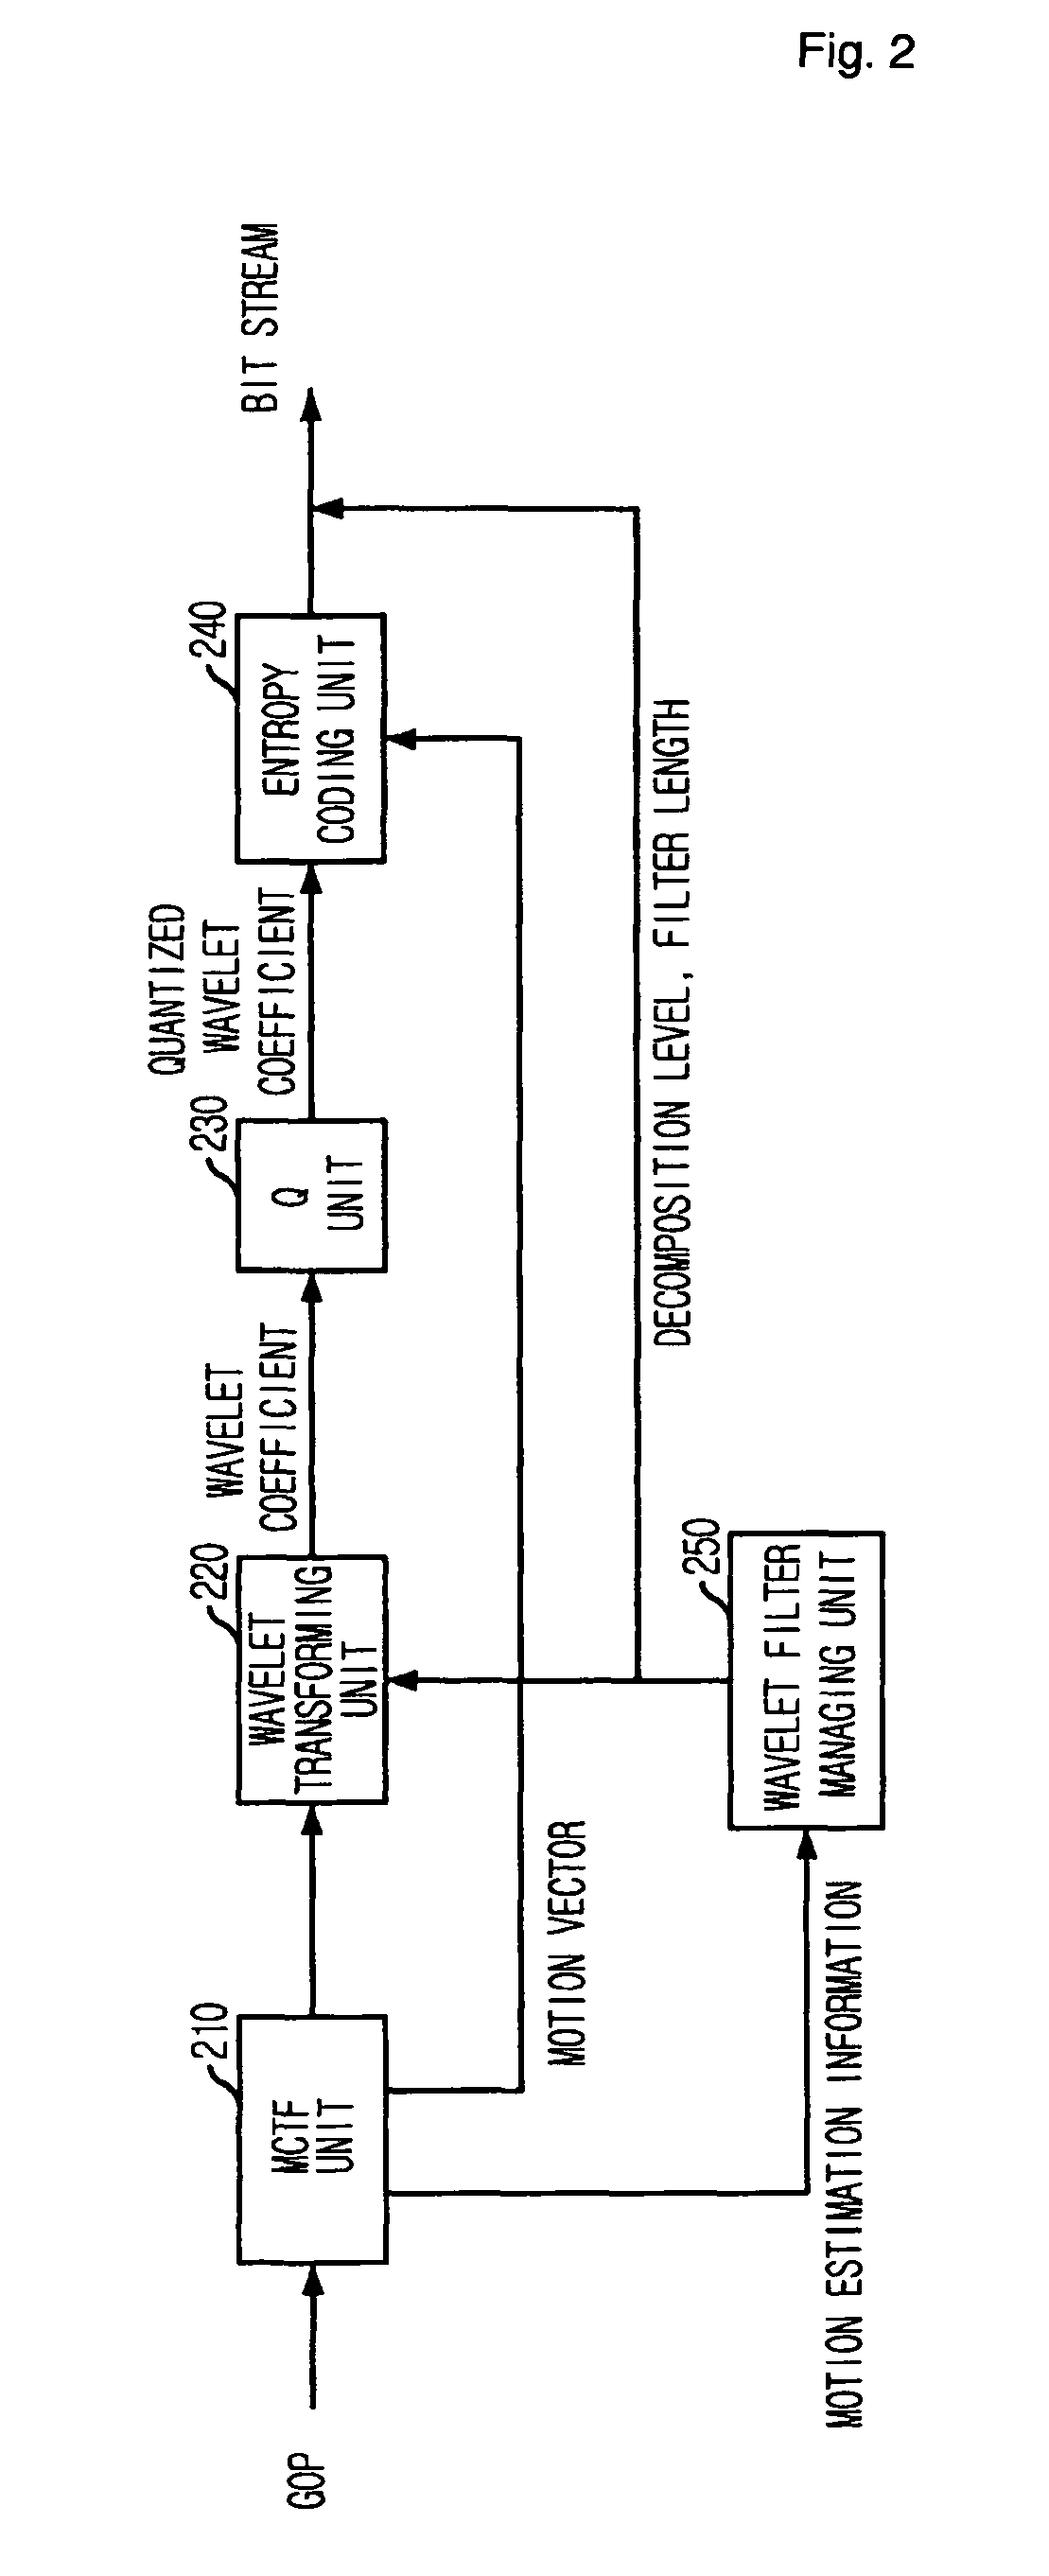 Interframe wavelet coding apparatus and method capable of adjusting computational complexity